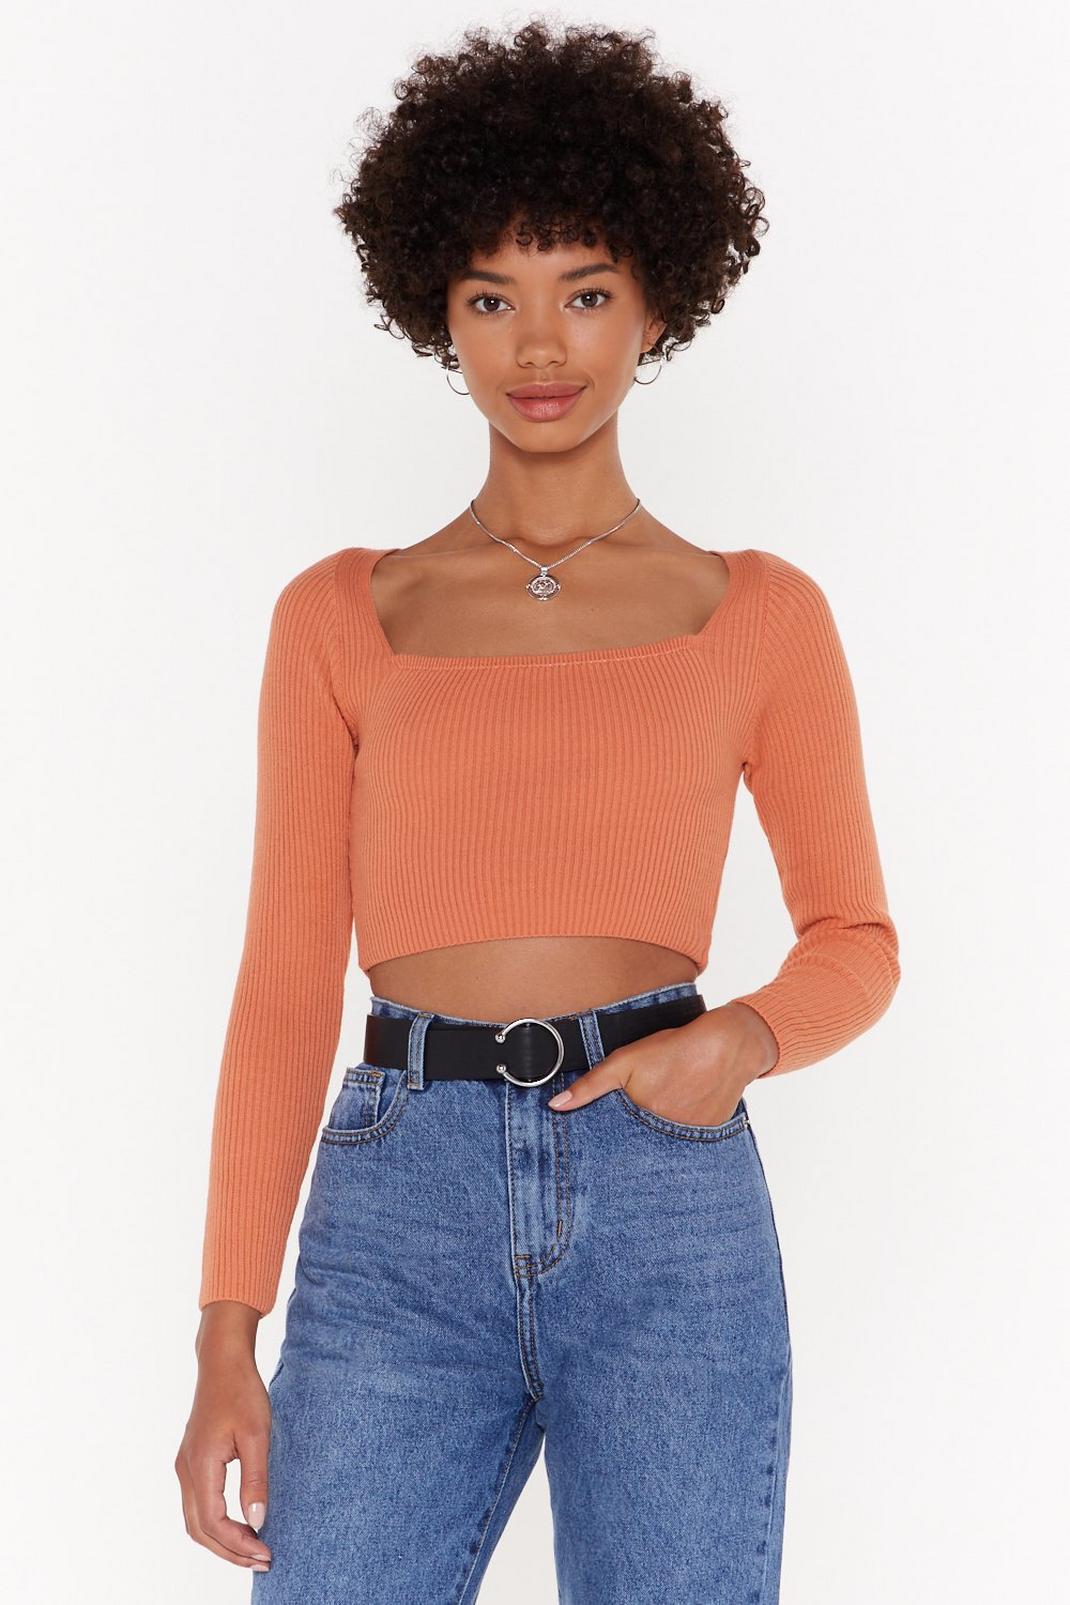 Don't Forget Square You Belong Ribbed Crop Top image number 1